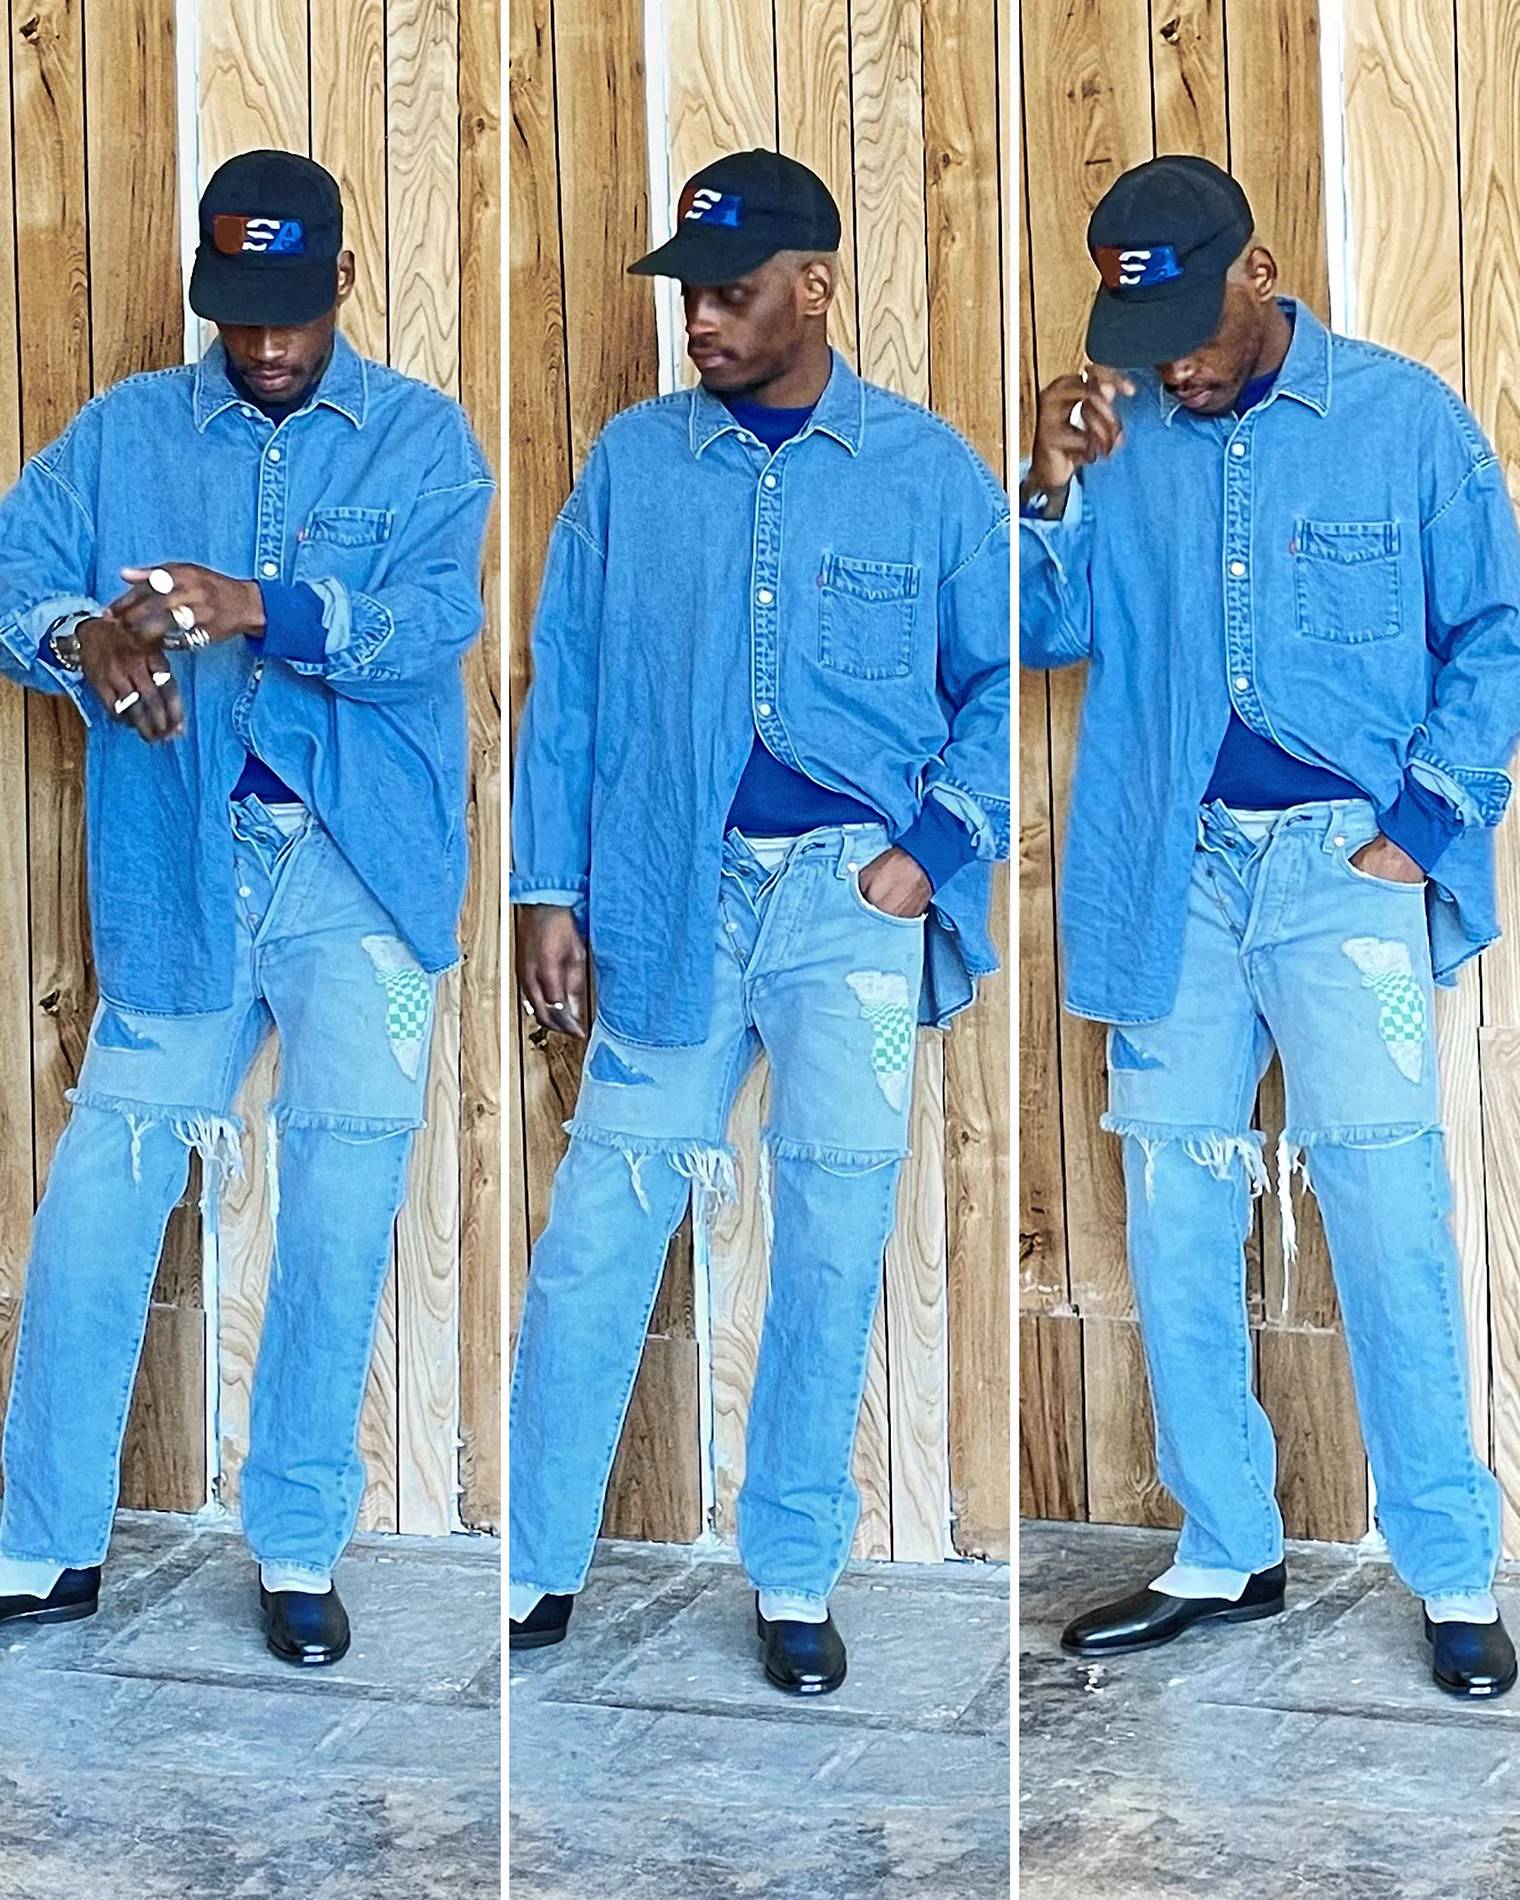 Alternating video showing different style looks of man wearing clothing and and accessories